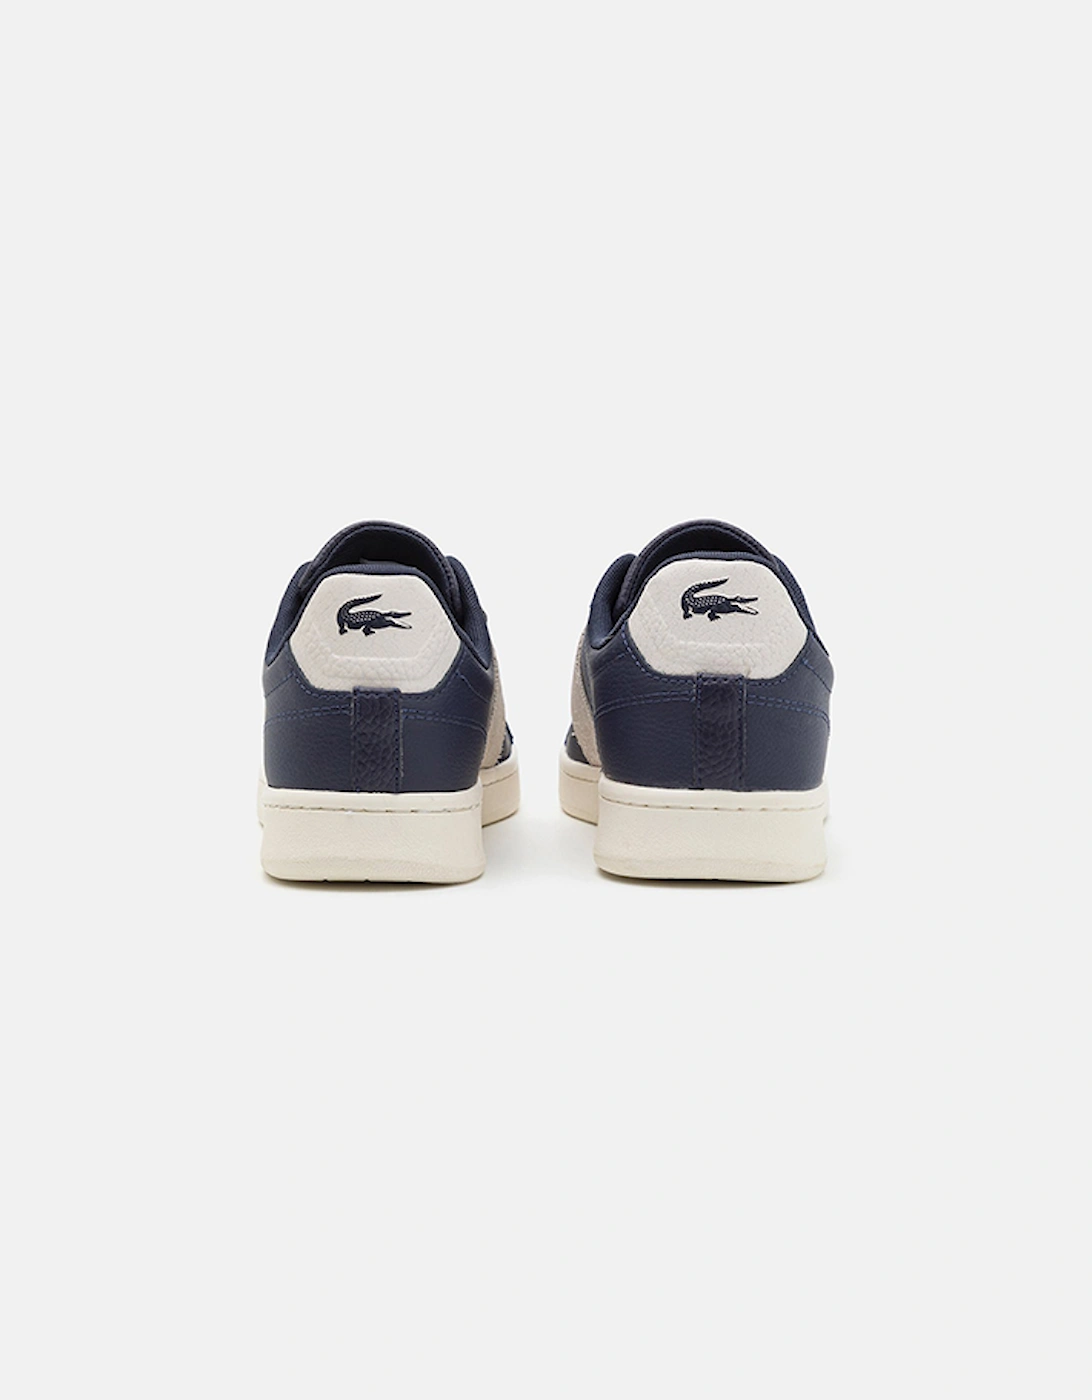 Men's Carnaby Pro Trainers